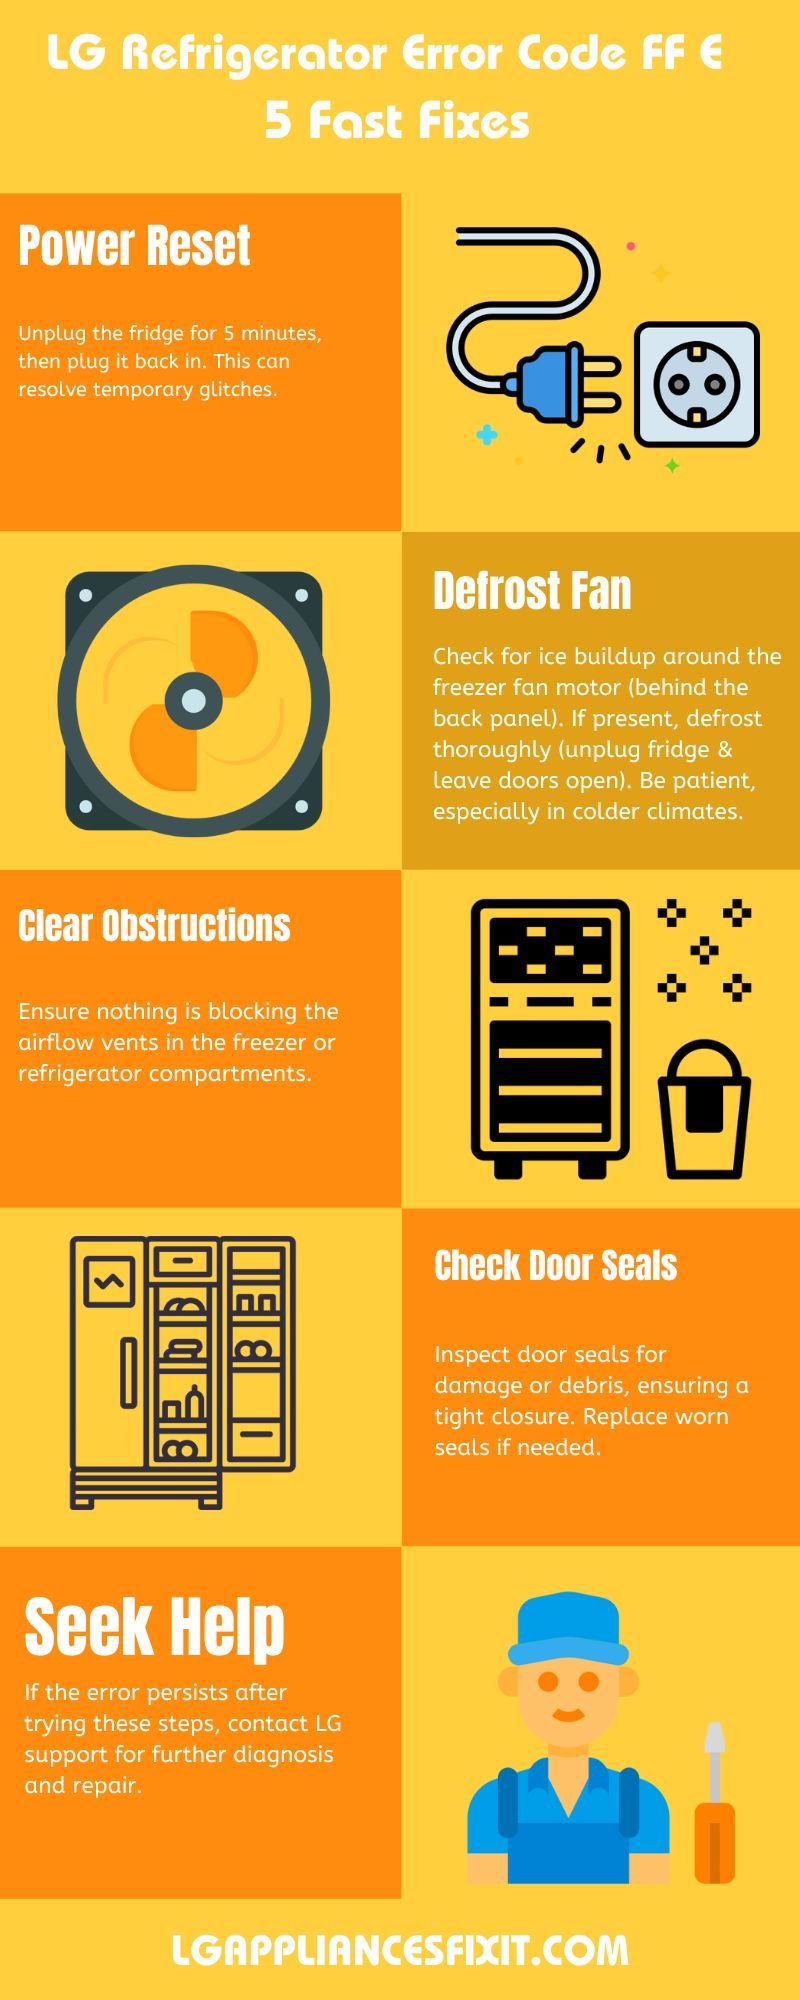 infographic of Step-by-Step Fixing Guide for LG Refrigerator Error Code FF E